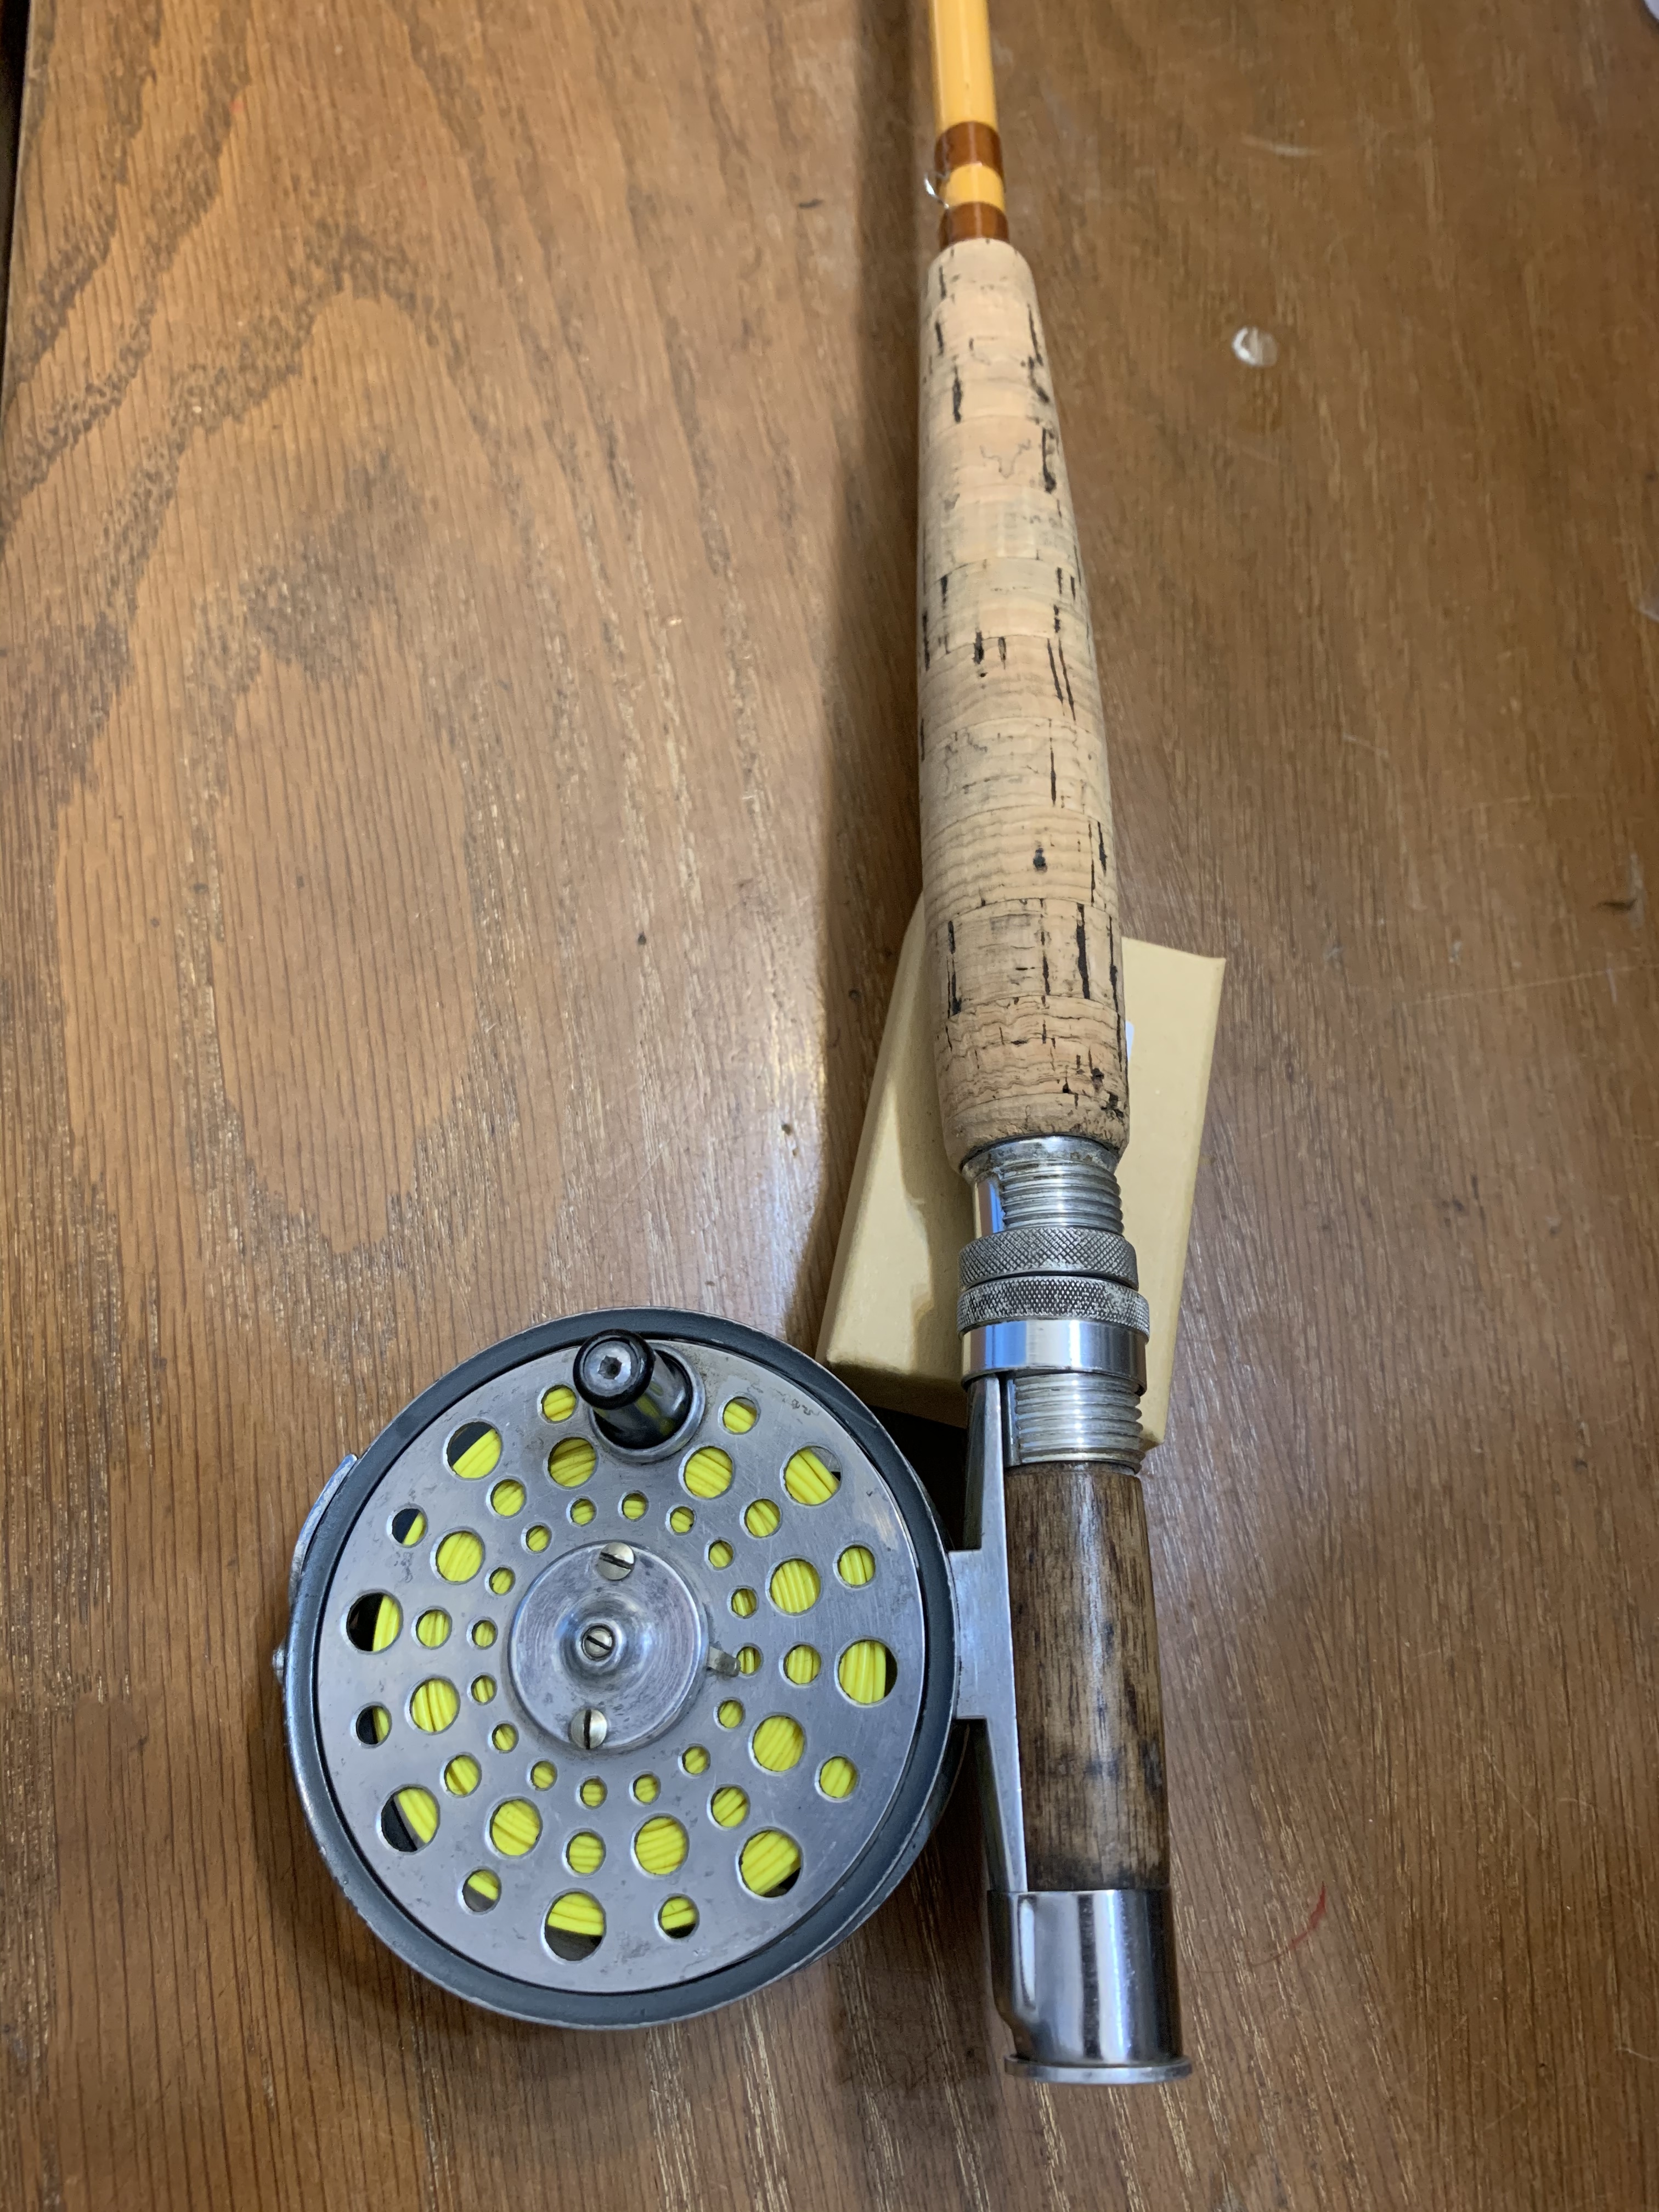 Orvis Battenkill / JW Young question